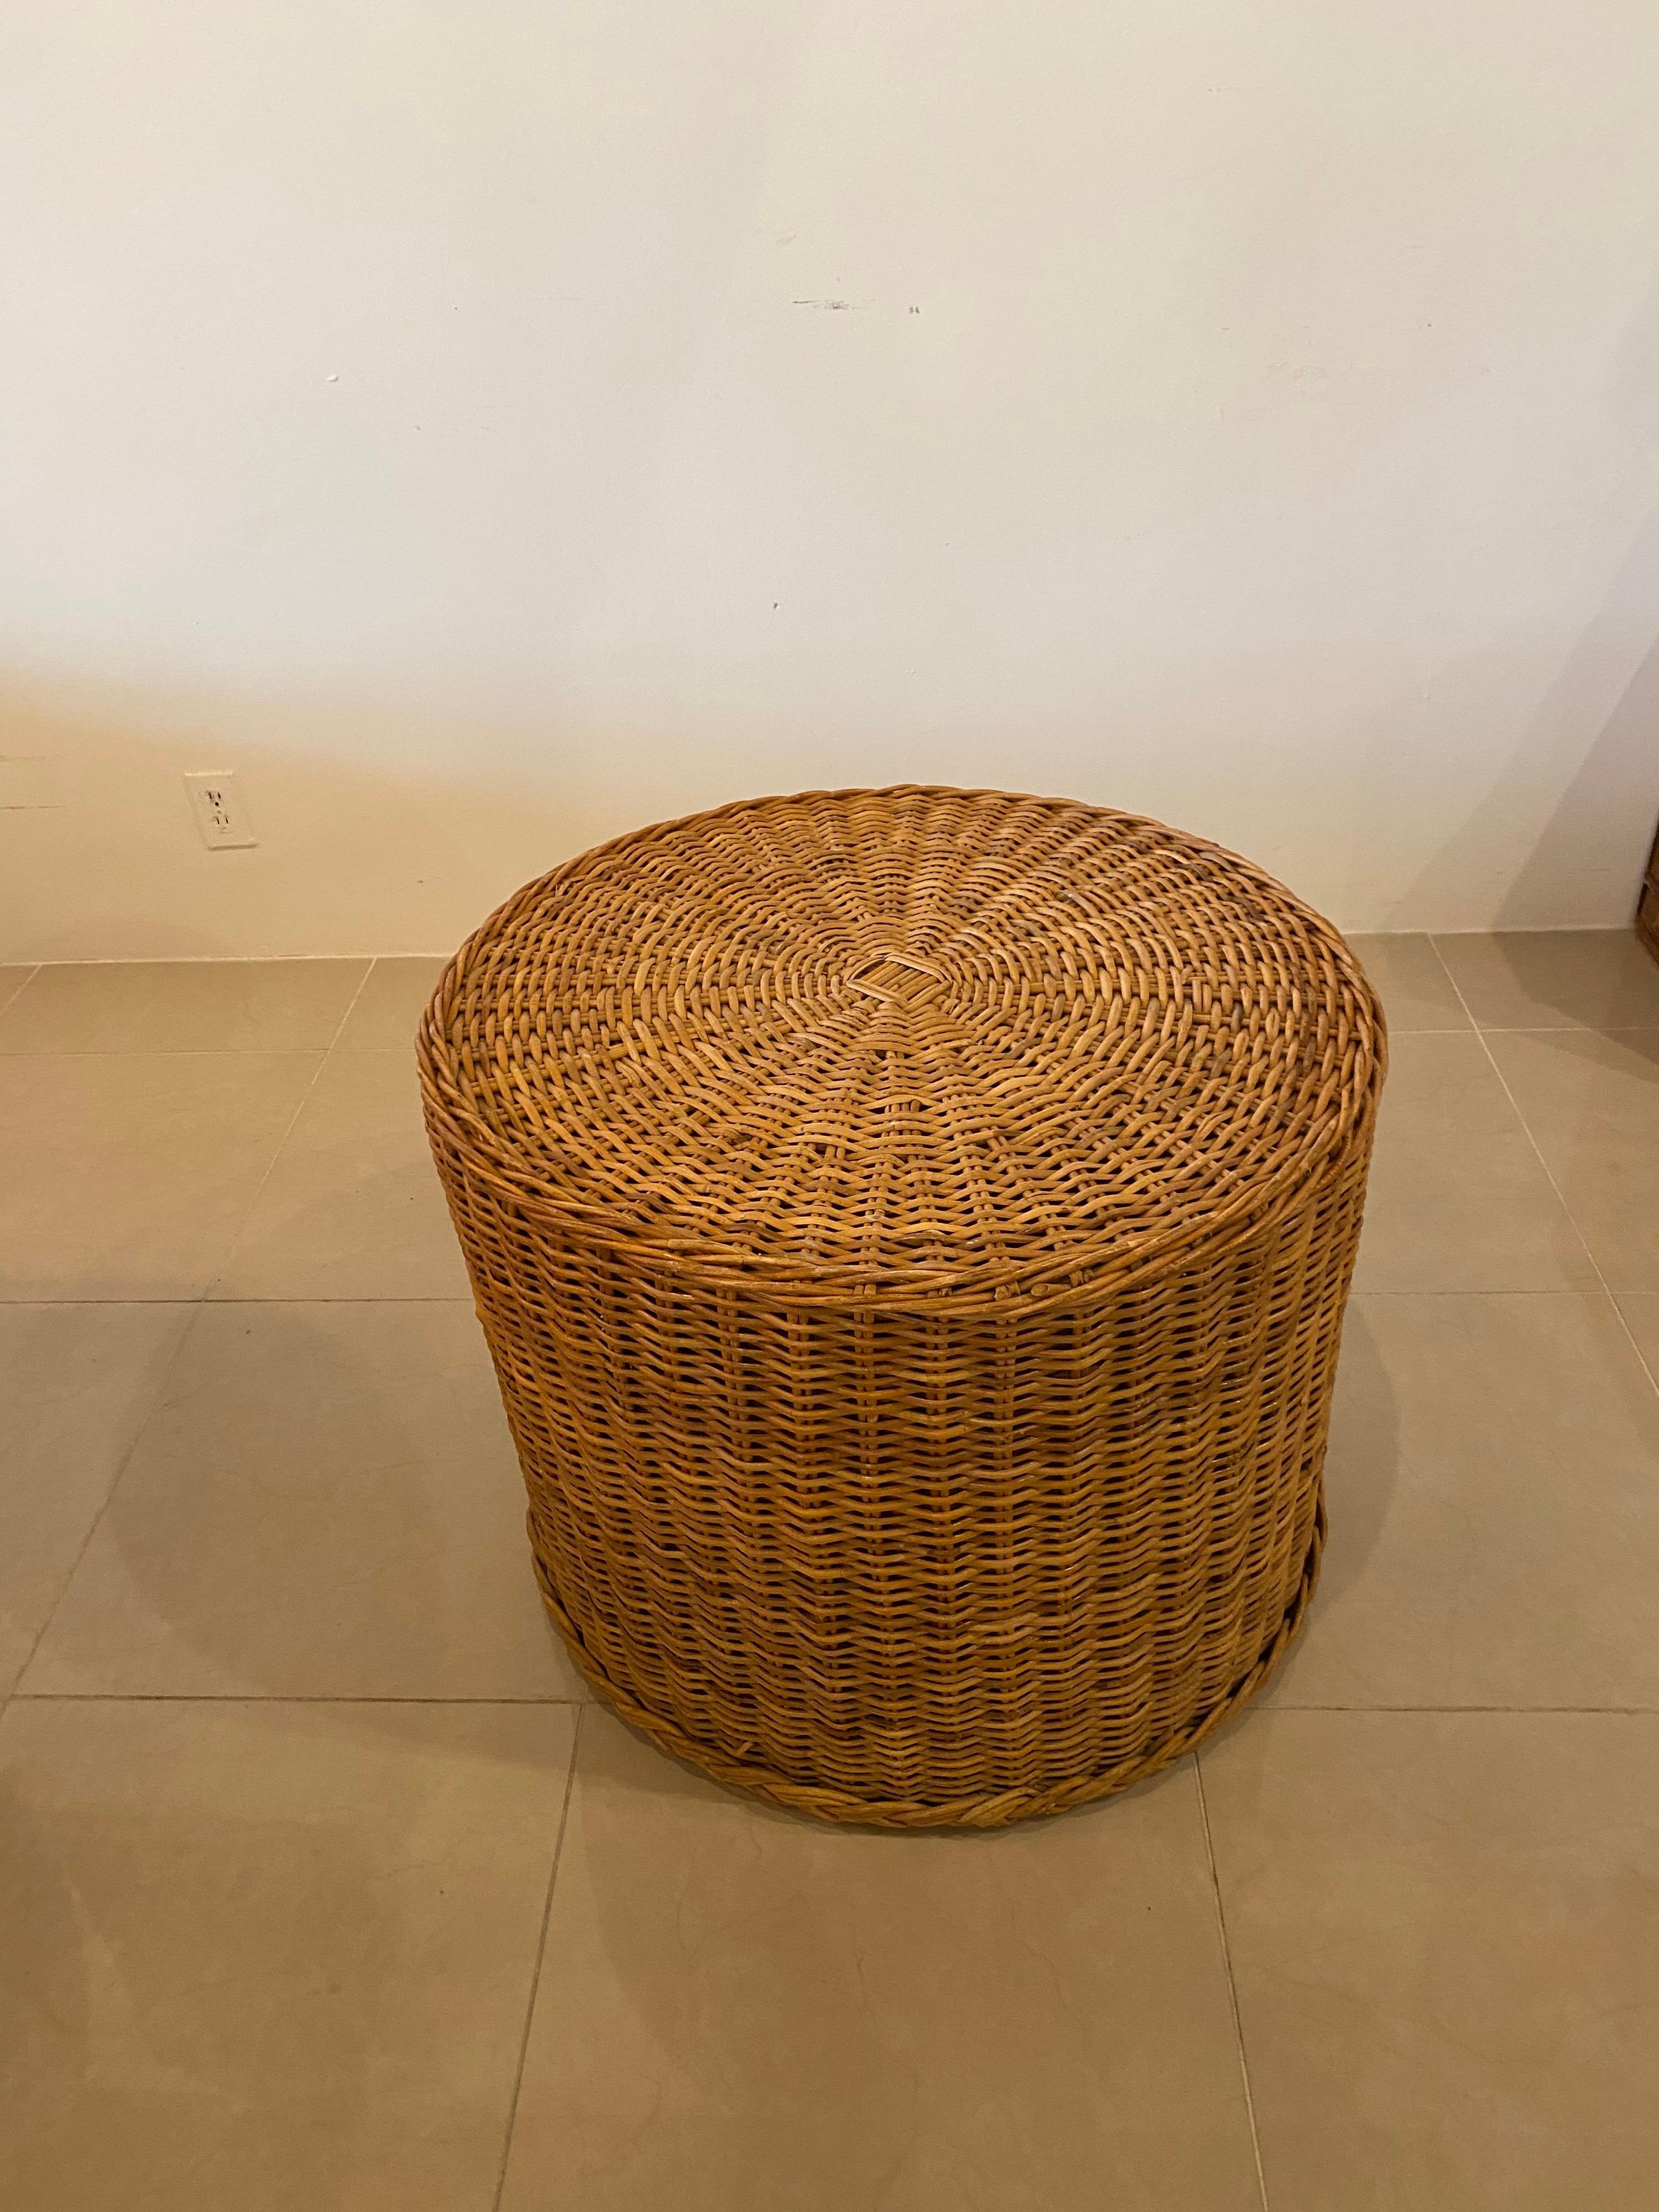 Lovely vintage braided wicker table by Wicker Works No defects. Very study! If you would like another shipping quote please let me know and I'm happy to get you one.